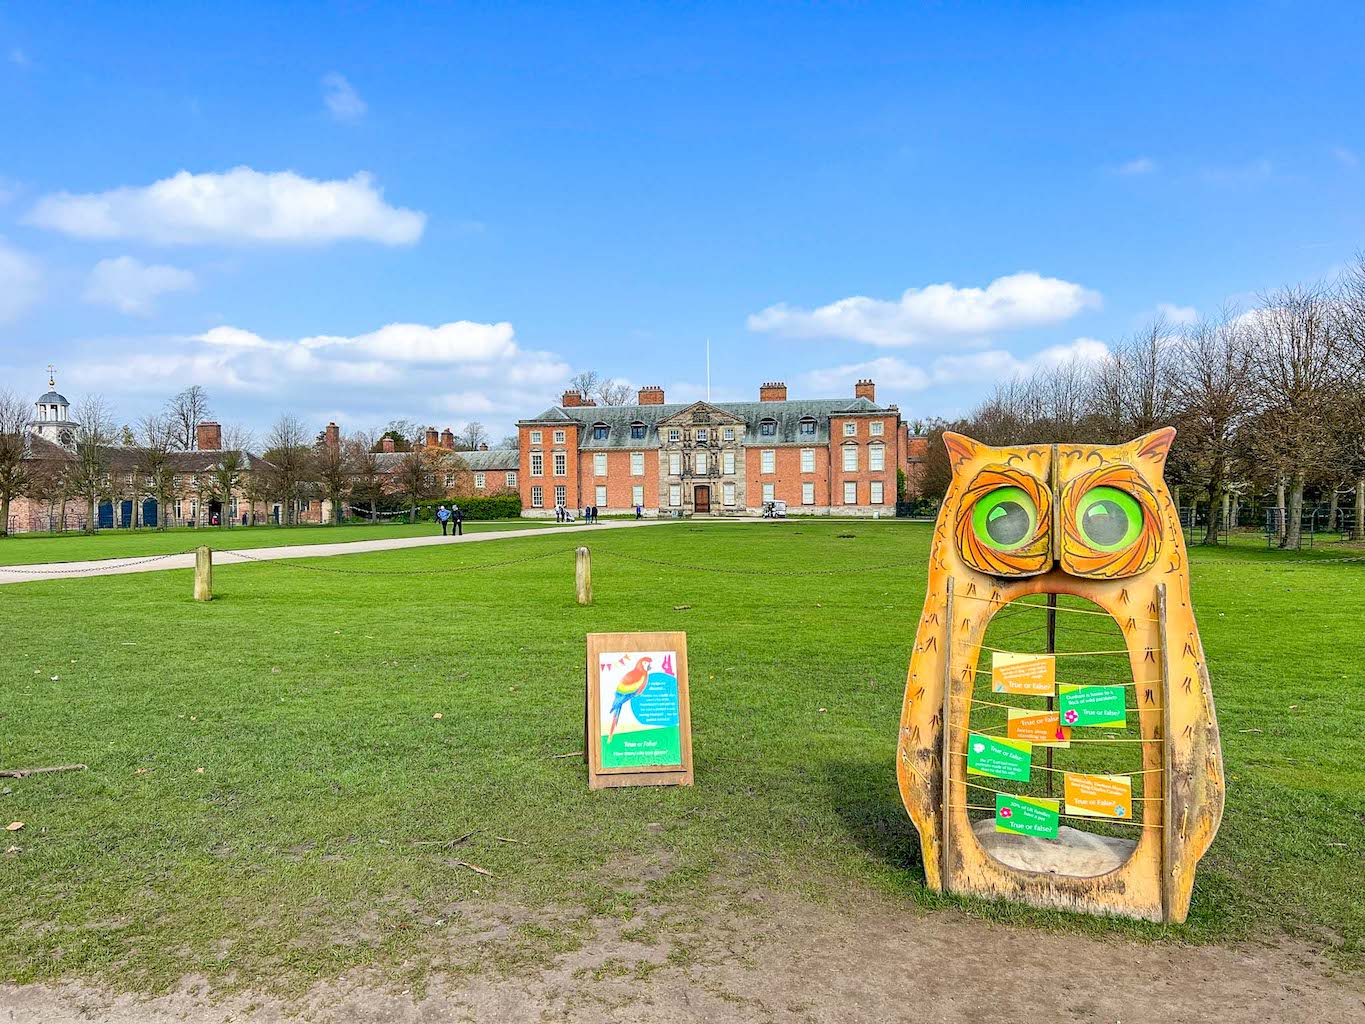 Things to do in Altrincham, Dunham Massey house and park